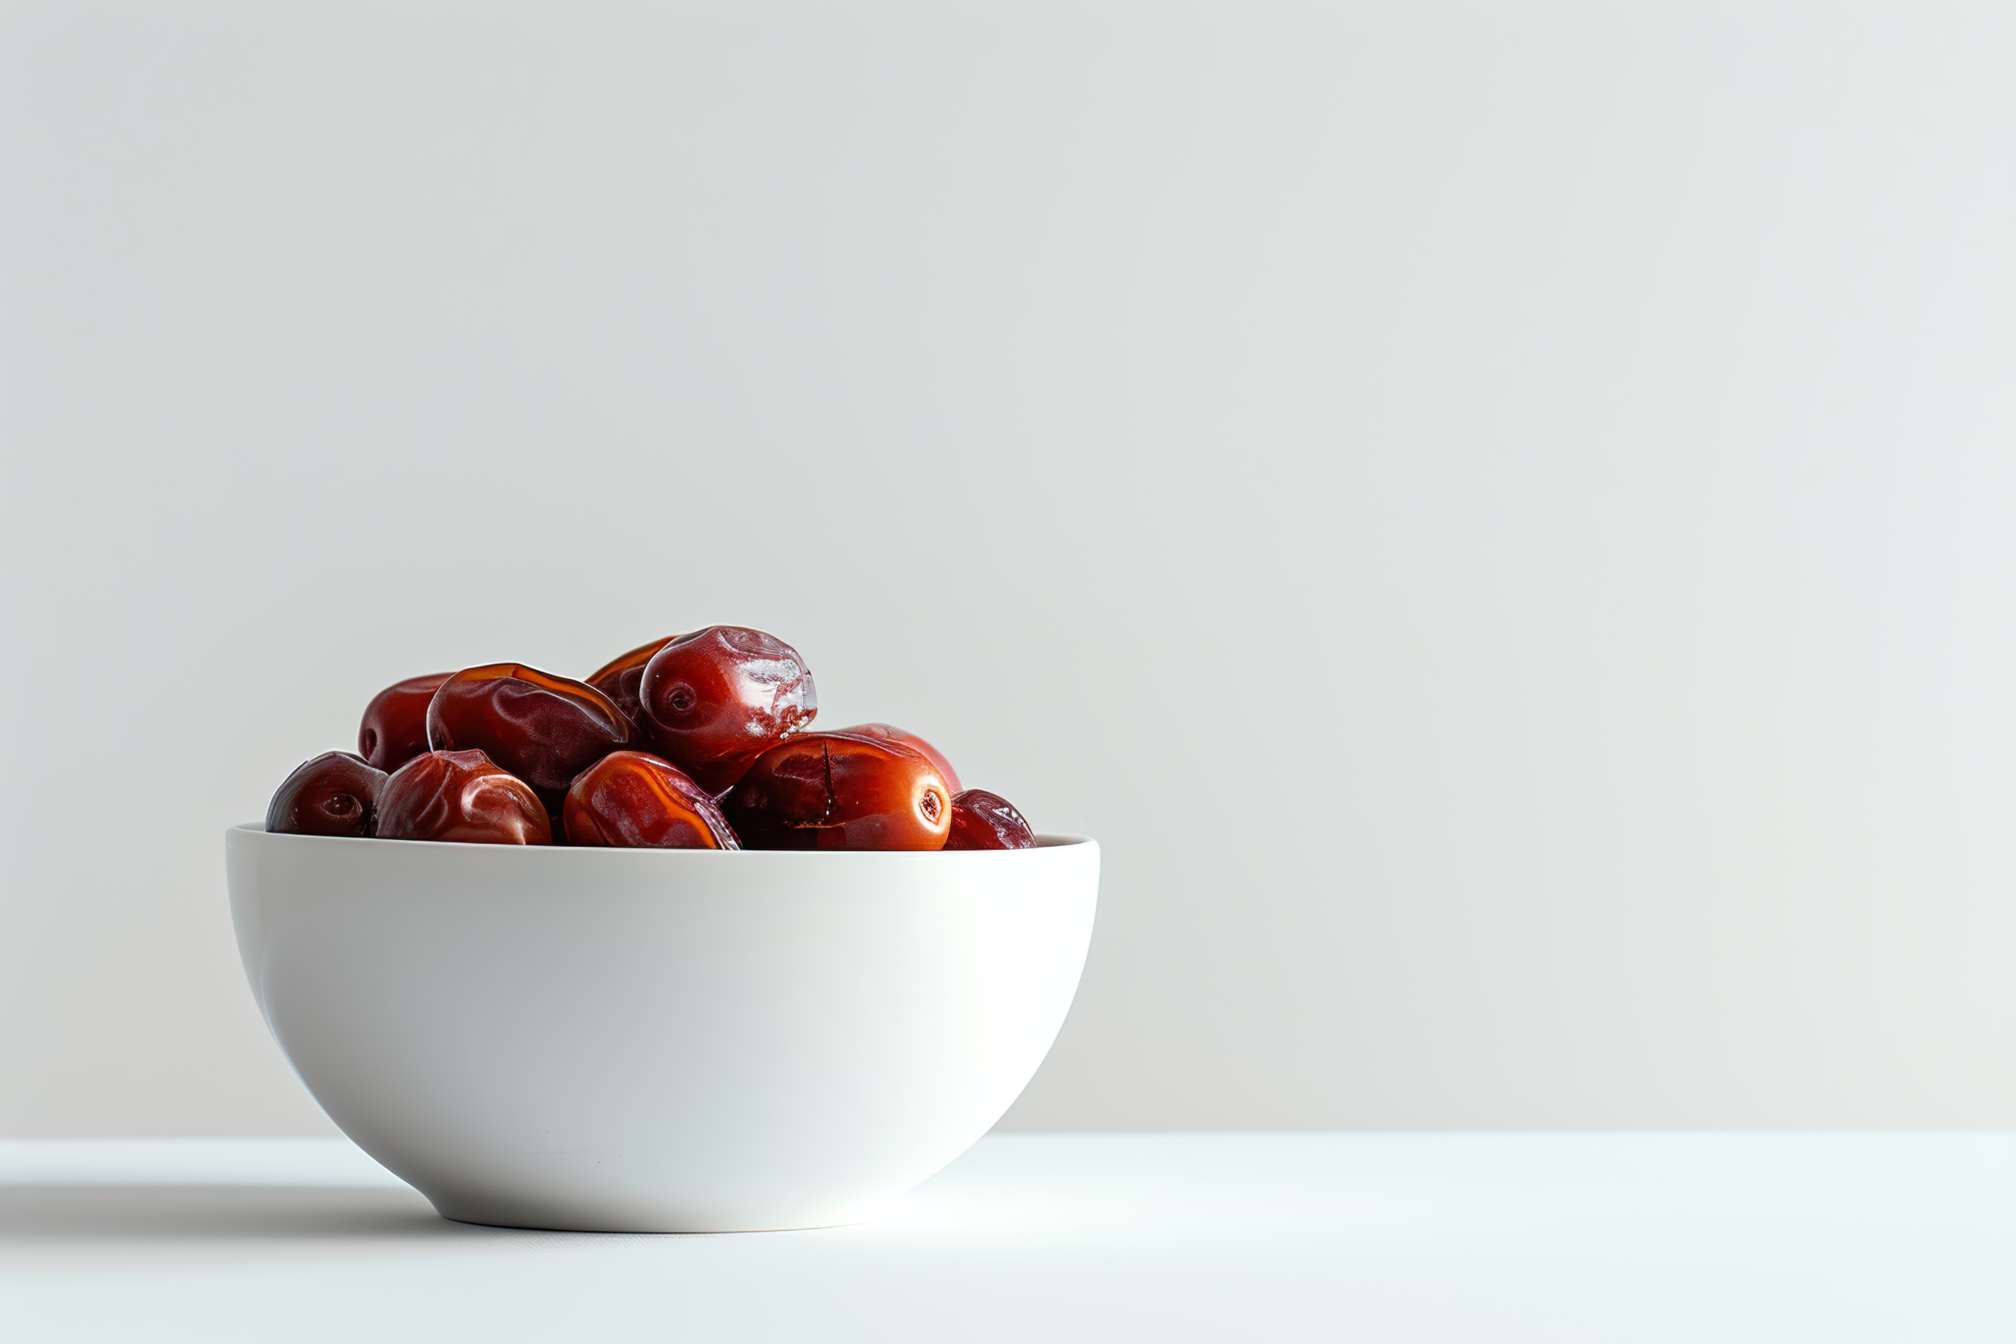 A bowl full of dates on white background